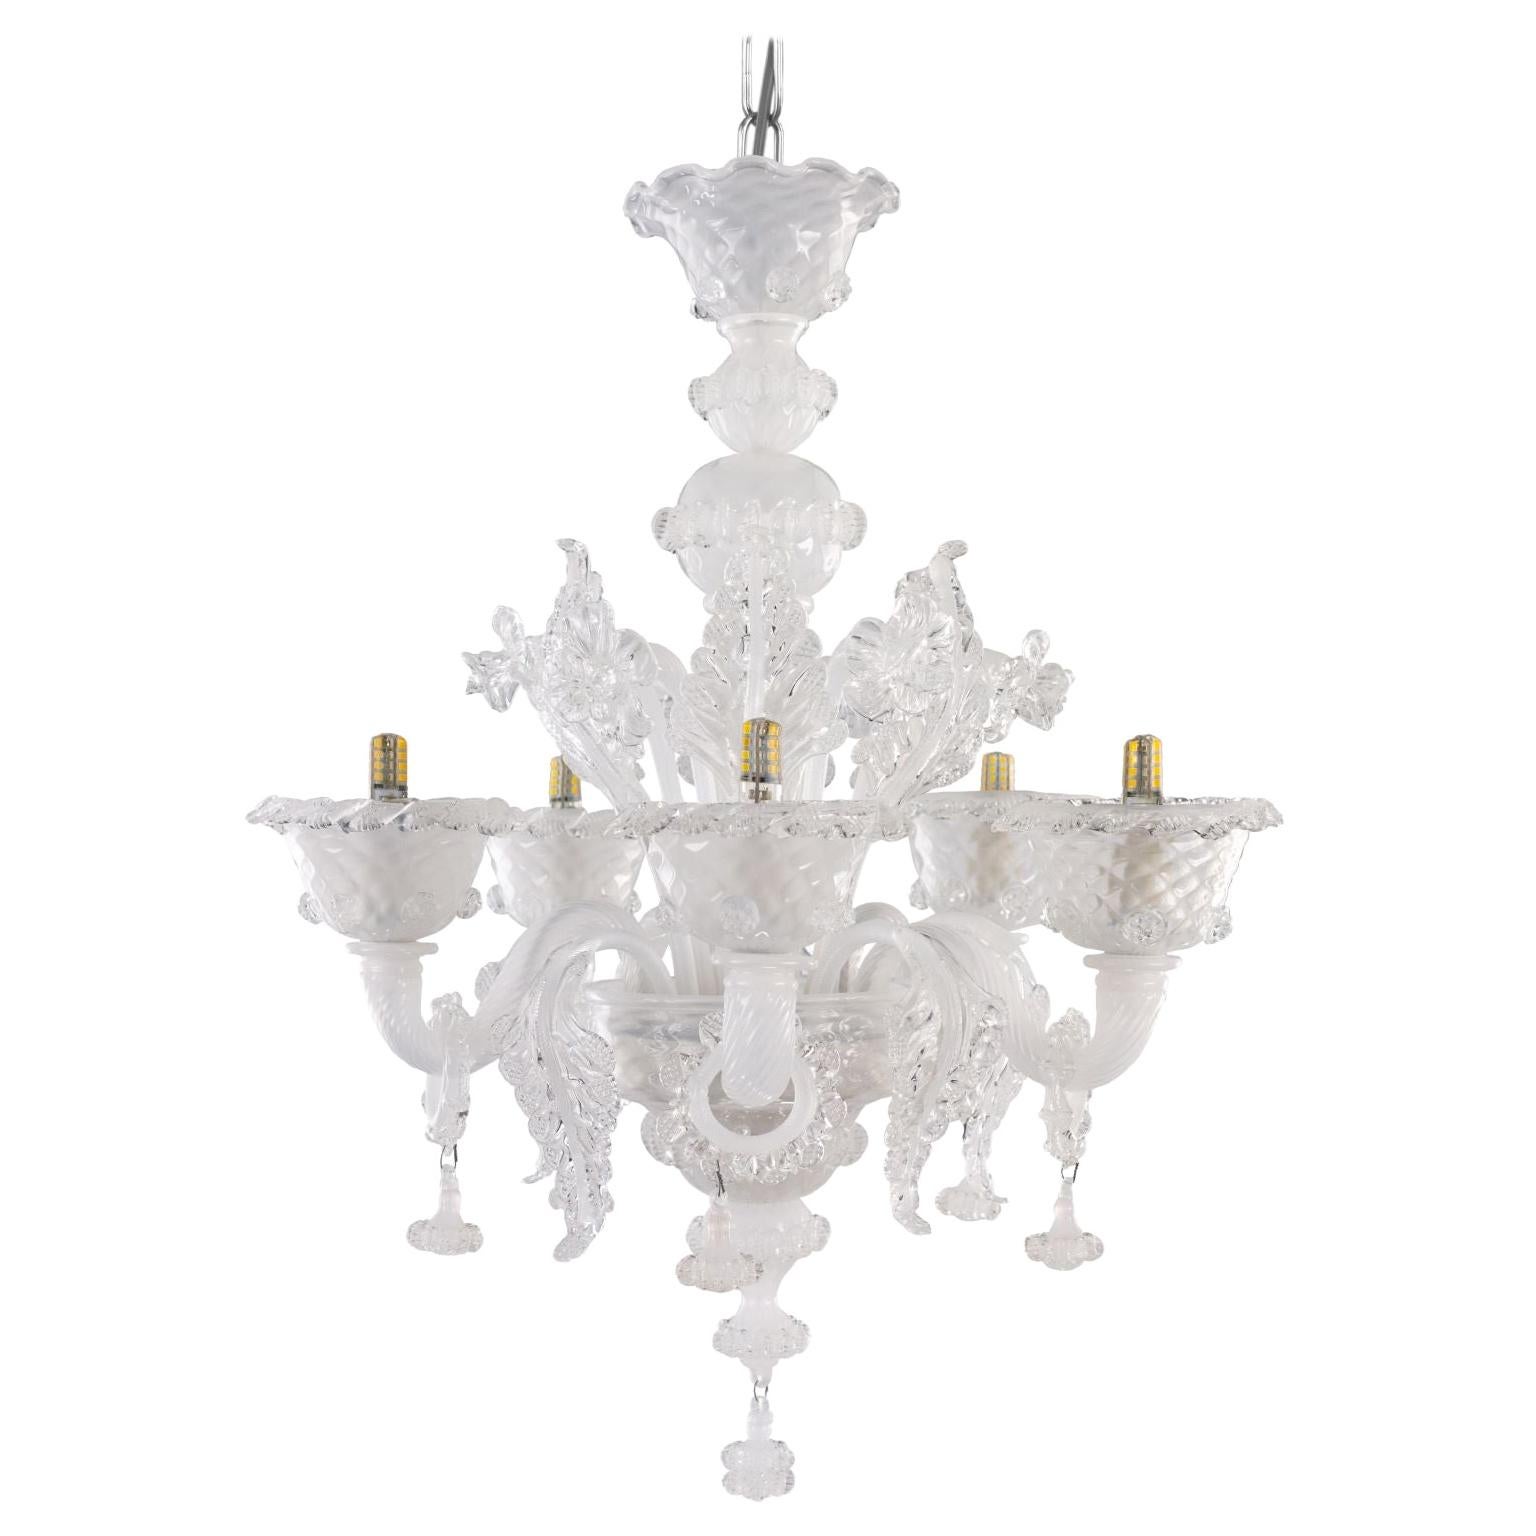 Artistic Rich Chandelier 5 Arms white-clear Murano Glass by Multiforme in stock For Sale